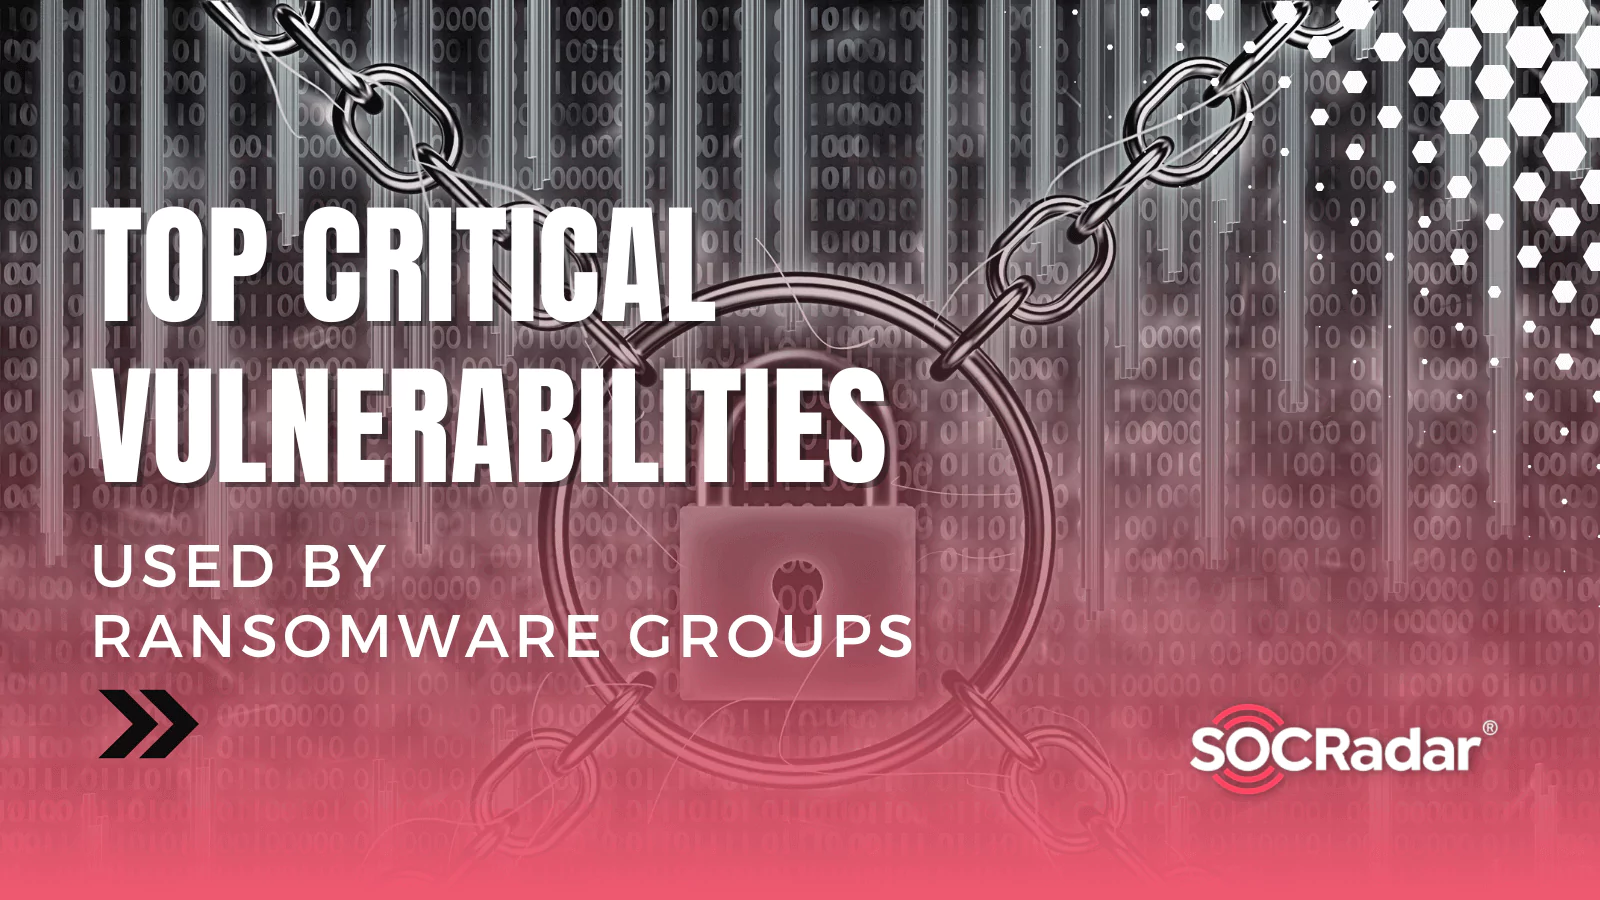 SOCRadar® Cyber Intelligence Inc. | Top Critical Vulnerabilities Used by Ransomware Groups